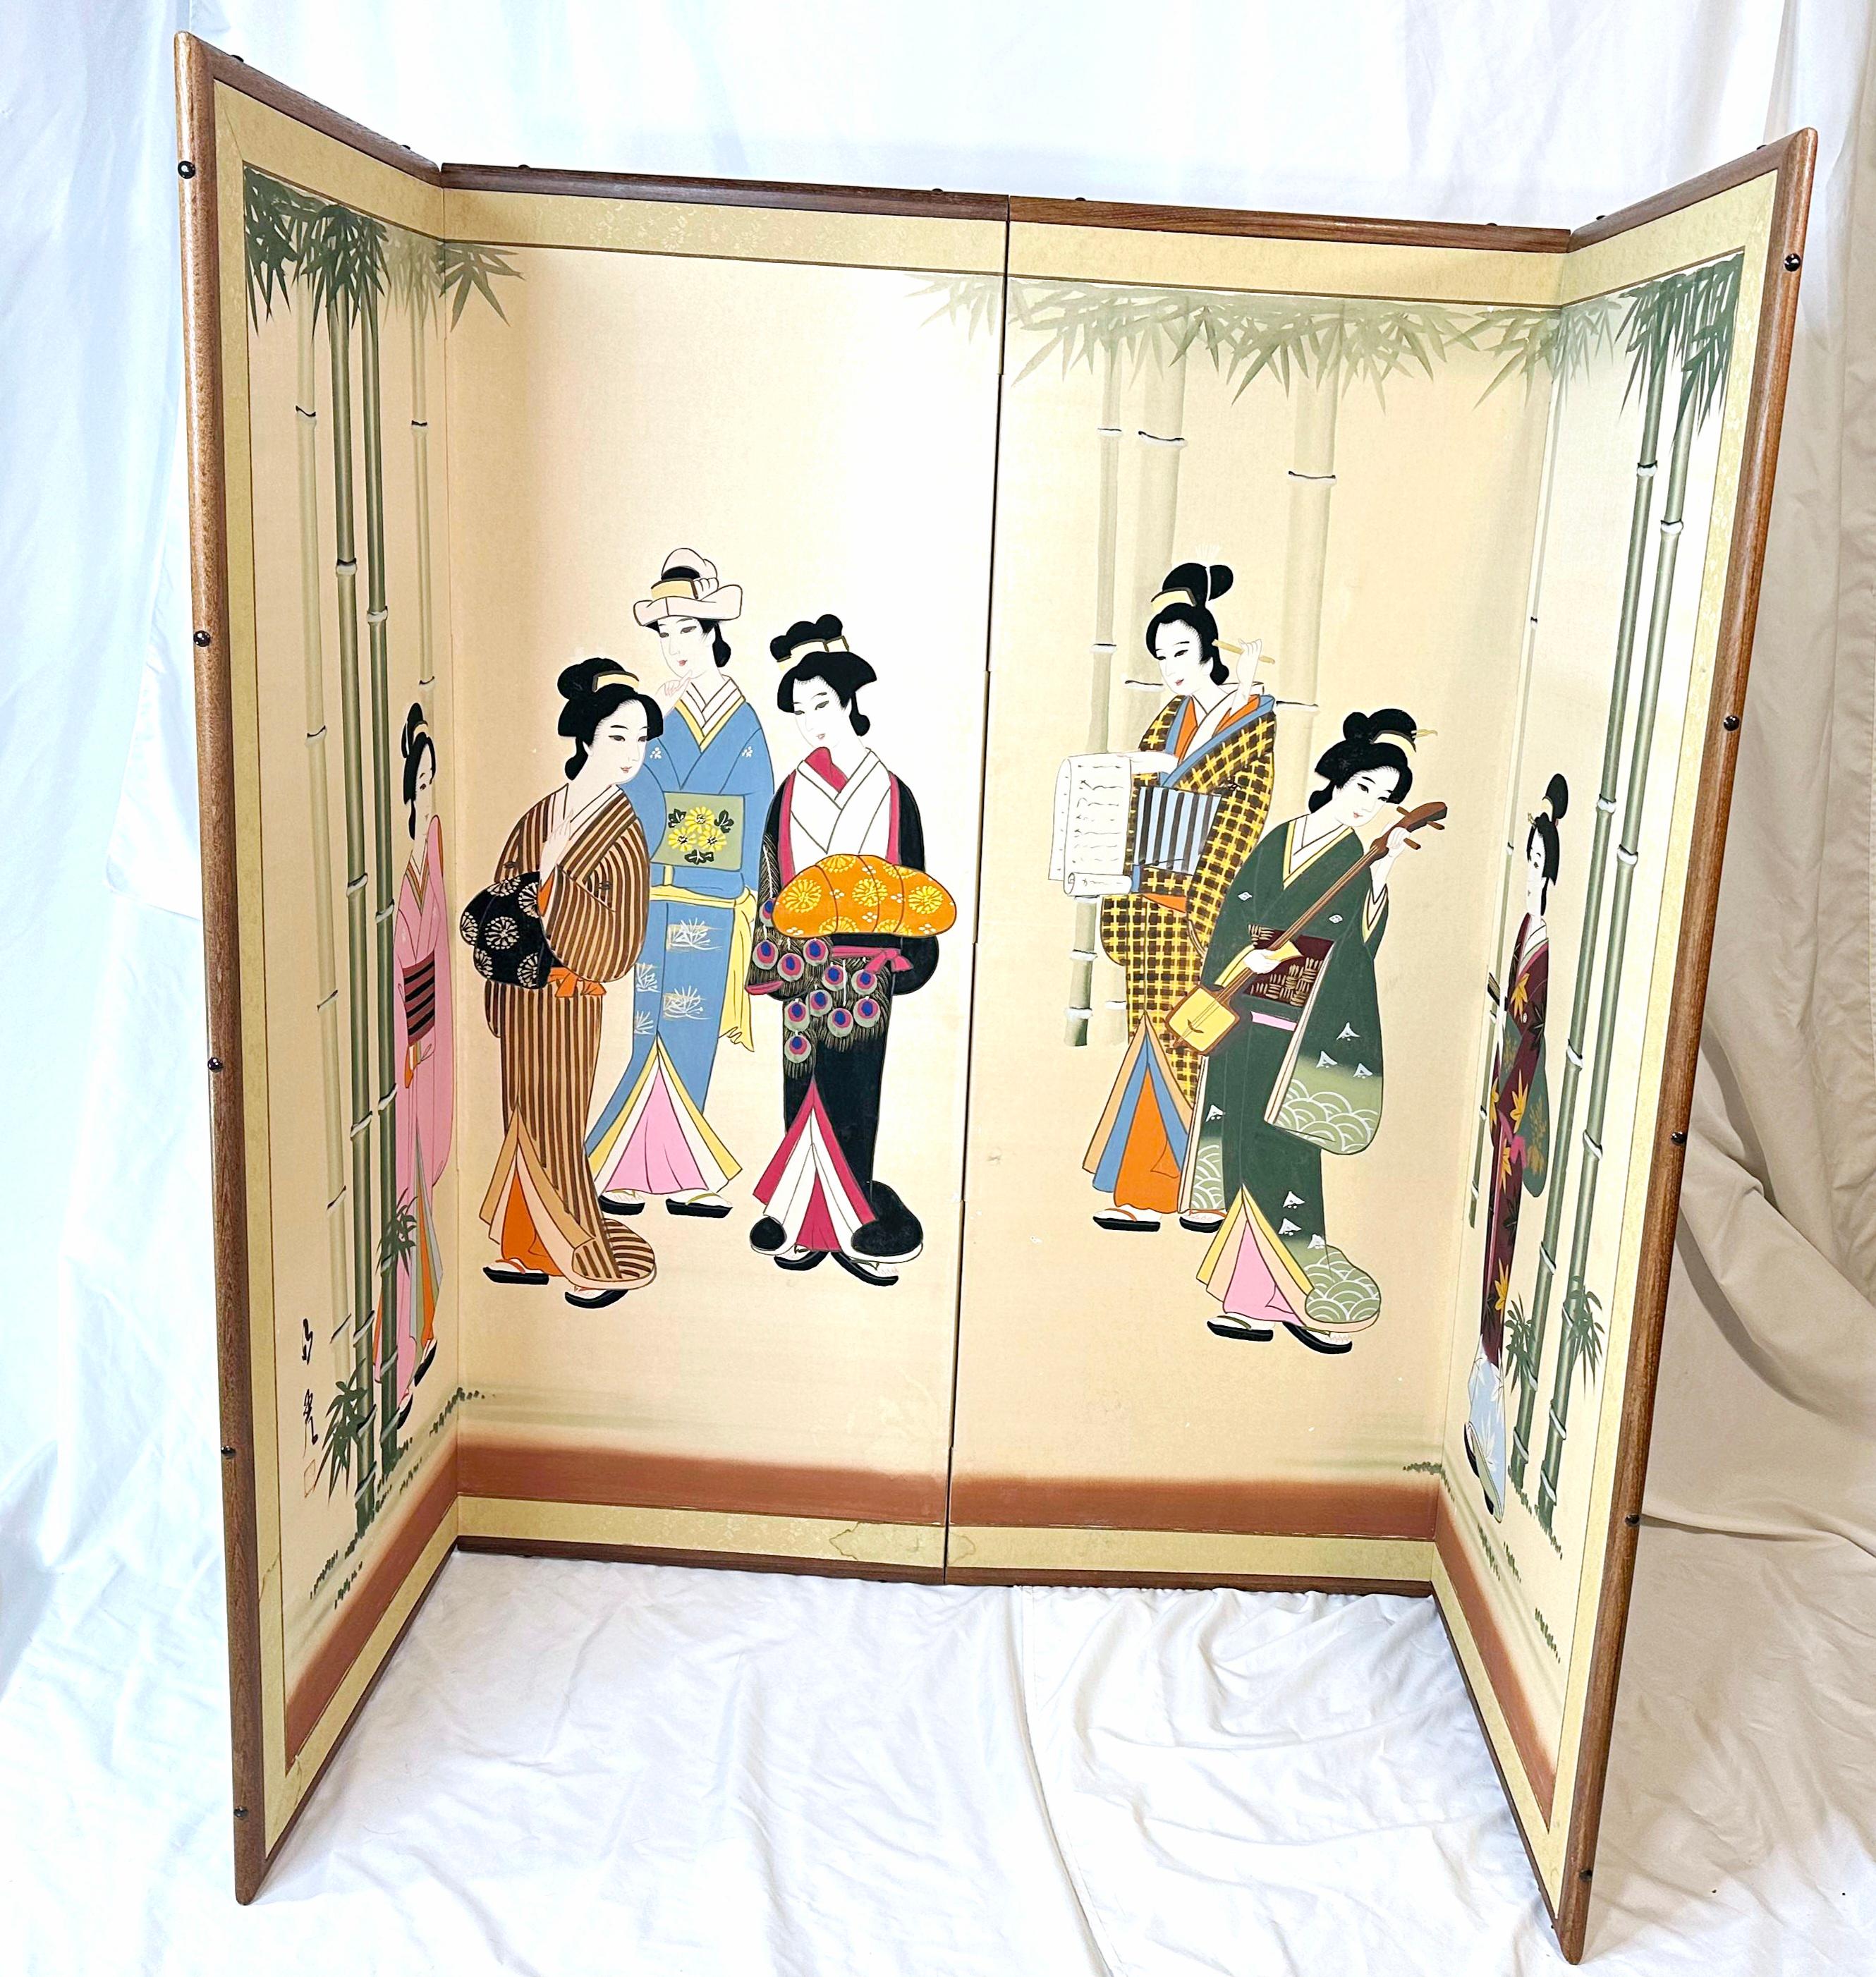 1960-1970s
Hand painted silk.
Rice paper backing. 
Made in Japan. 
Six colorful Geisha surrounded by bamboo trees.
Little details, a shamisen, or Japanese guitar, a rice paper scroll, a Geisha carrying a kimono, or hikizuri. 
Some are holding a